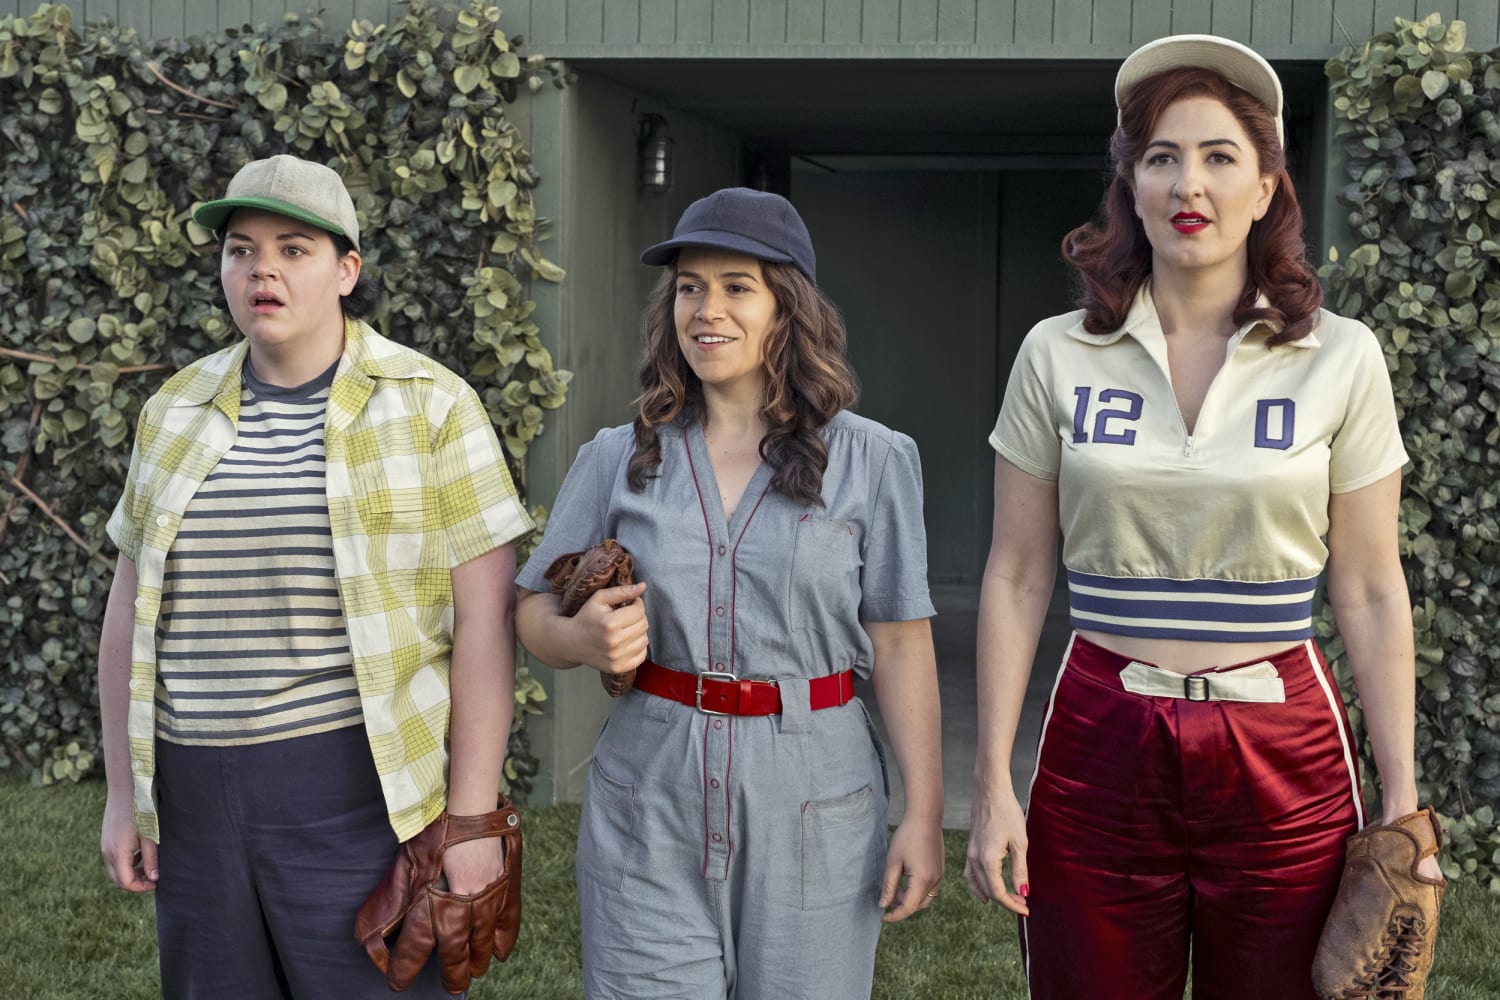 A League of Her Own